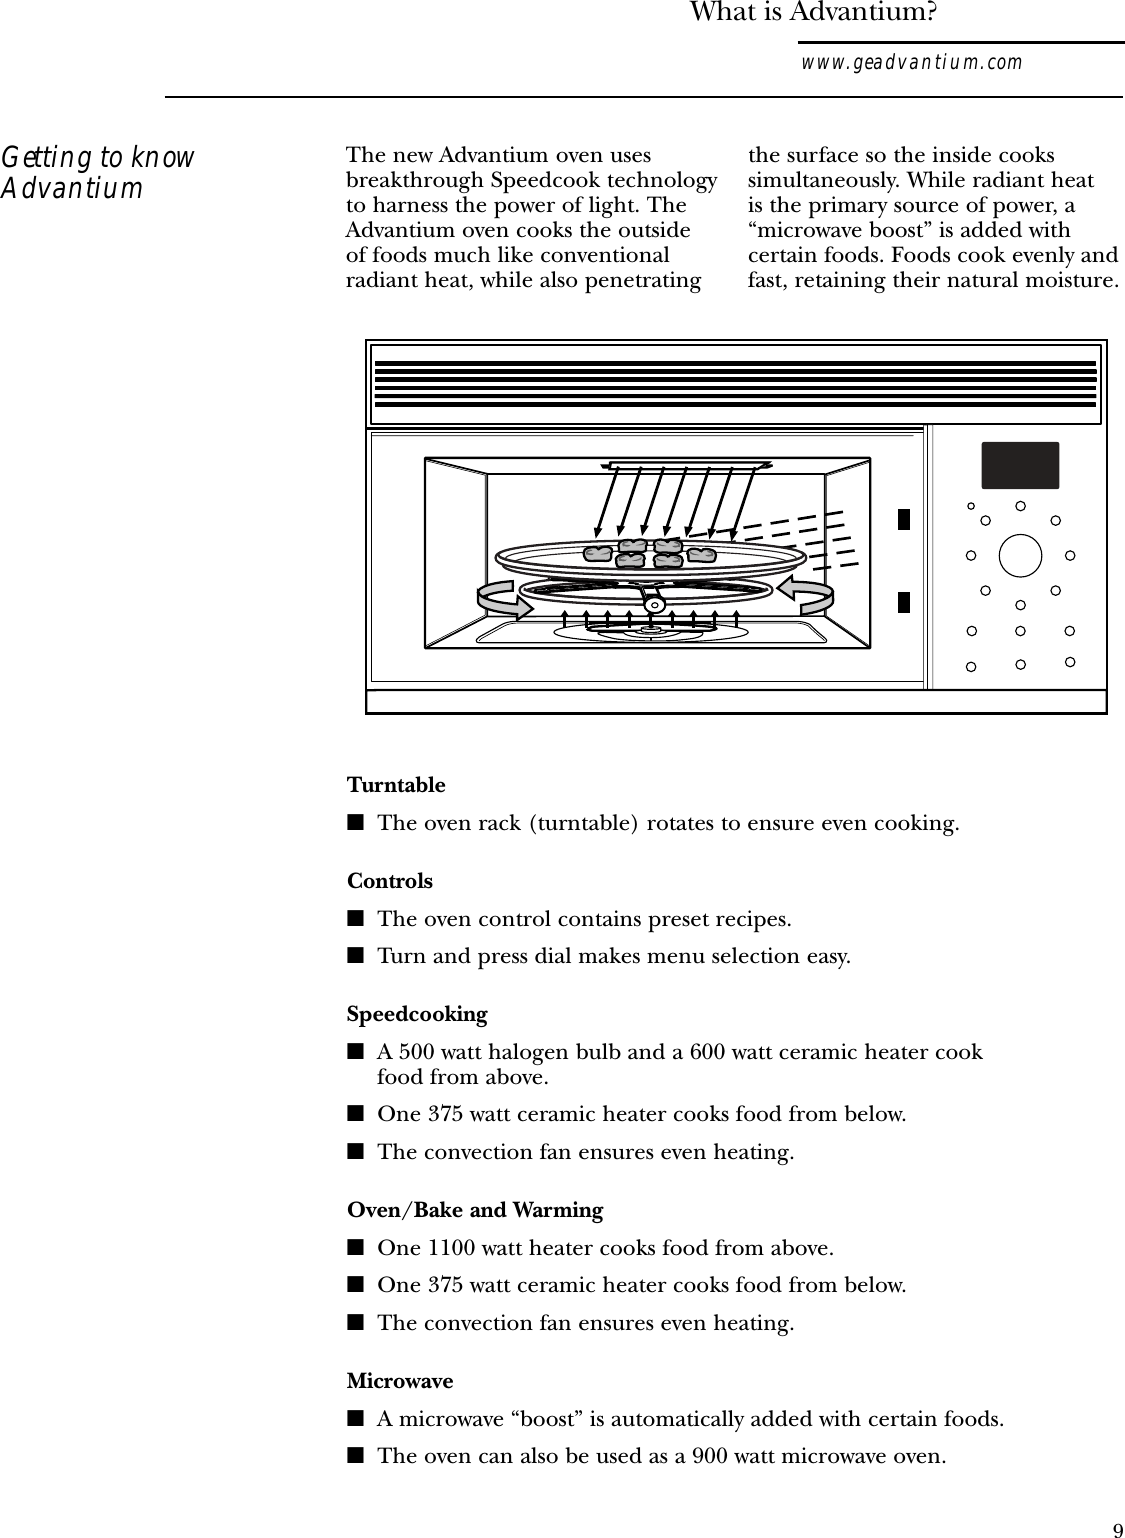 What is Advantium?www.geadvantium.comThe new Advantium oven usesbreakthrough Speedcook technologyto harness the power of light. TheAdvantium oven cooks the outside of foods much like conventionalradiant heat, while also penetratingthe surface so the inside cookssimultaneously. While radiant heatis the primary source of power, a“microwave boost” is added withcertain foods. Foods cook evenly andfast, retaining their natural moisture.Turntable■The oven rack (turntable) rotates to ensure even cooking.Controls■The oven control contains preset recipes.■Turn and press dial makes menu selection easy.Speedcooking■A 500 watt halogen bulb and a 600 watt ceramic heater cook food from above.■One 375 watt ceramic heater cooks food from below.■The convection fan ensures even heating.Oven/Bake and Warming■One 1100 watt heater cooks food from above.■One 375 watt ceramic heater cooks food from below.■The convection fan ensures even heating.Microwave■A microwave “boost” is automatically added with certain foods.■The oven can also be used as a 900 watt microwave oven.Getting to knowAdvantium9